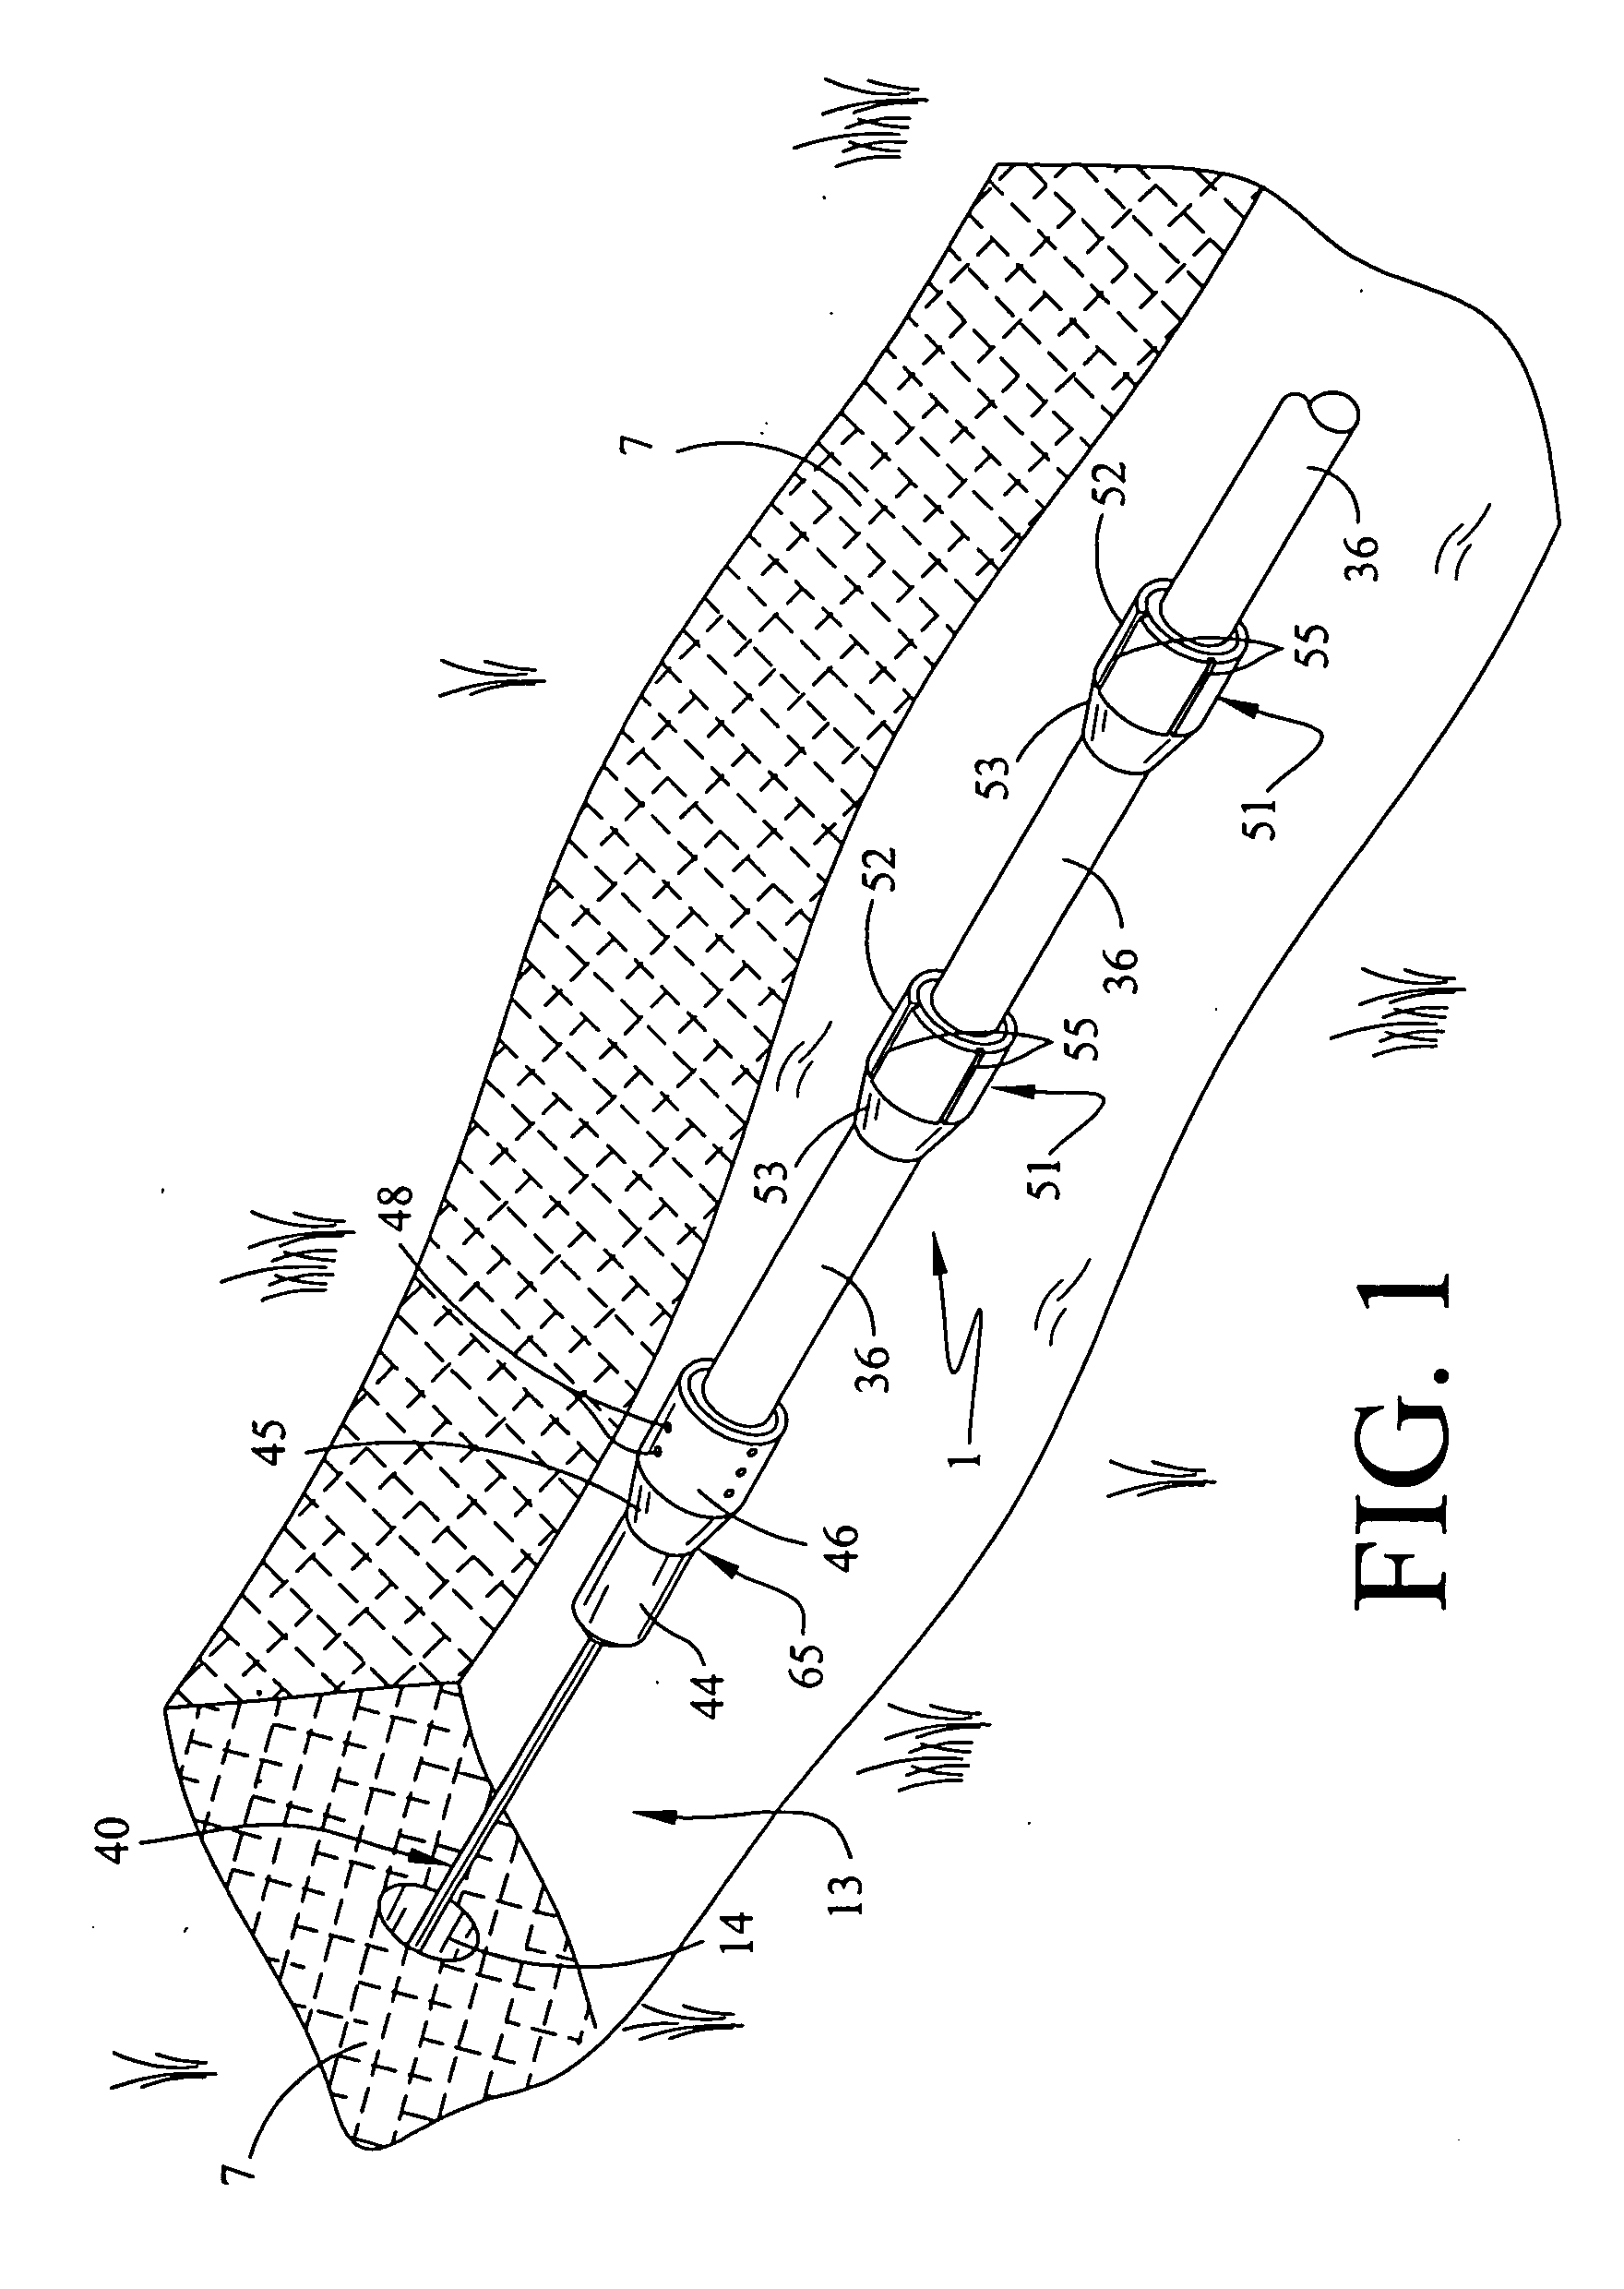 Bore hole sleeve reaming apparatus and method